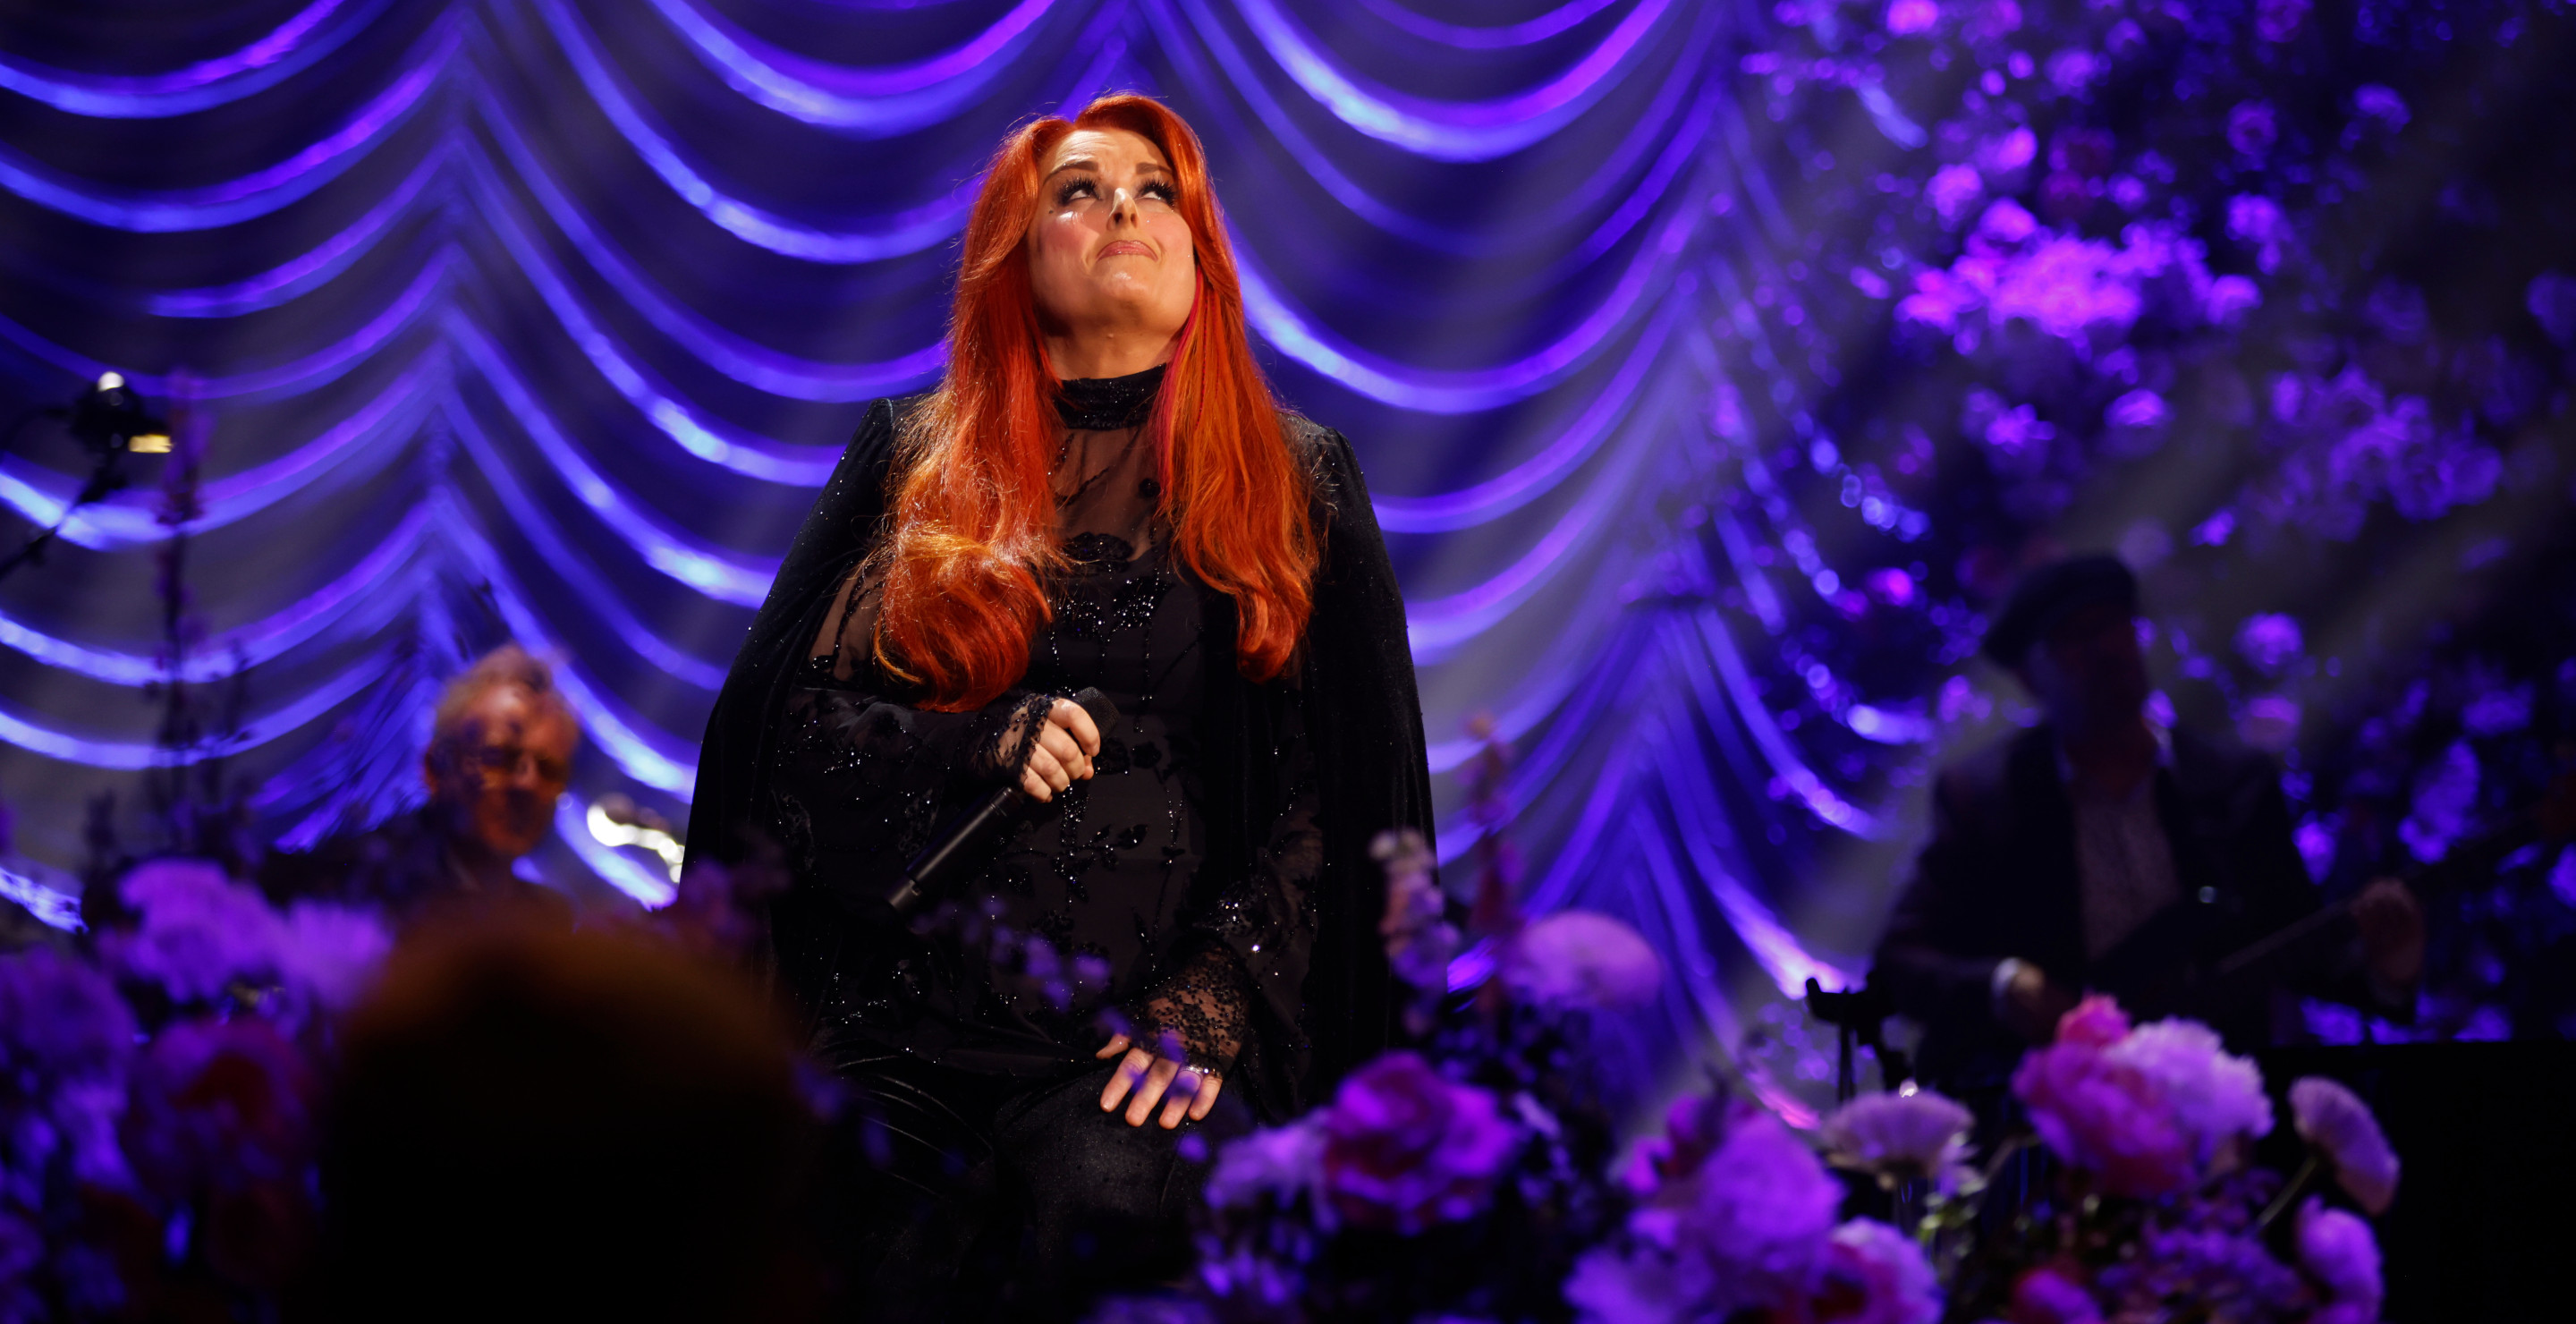 Wynonna Judd Opens Up About Caring For Granddaughter Amid Daughter's Legal Woes